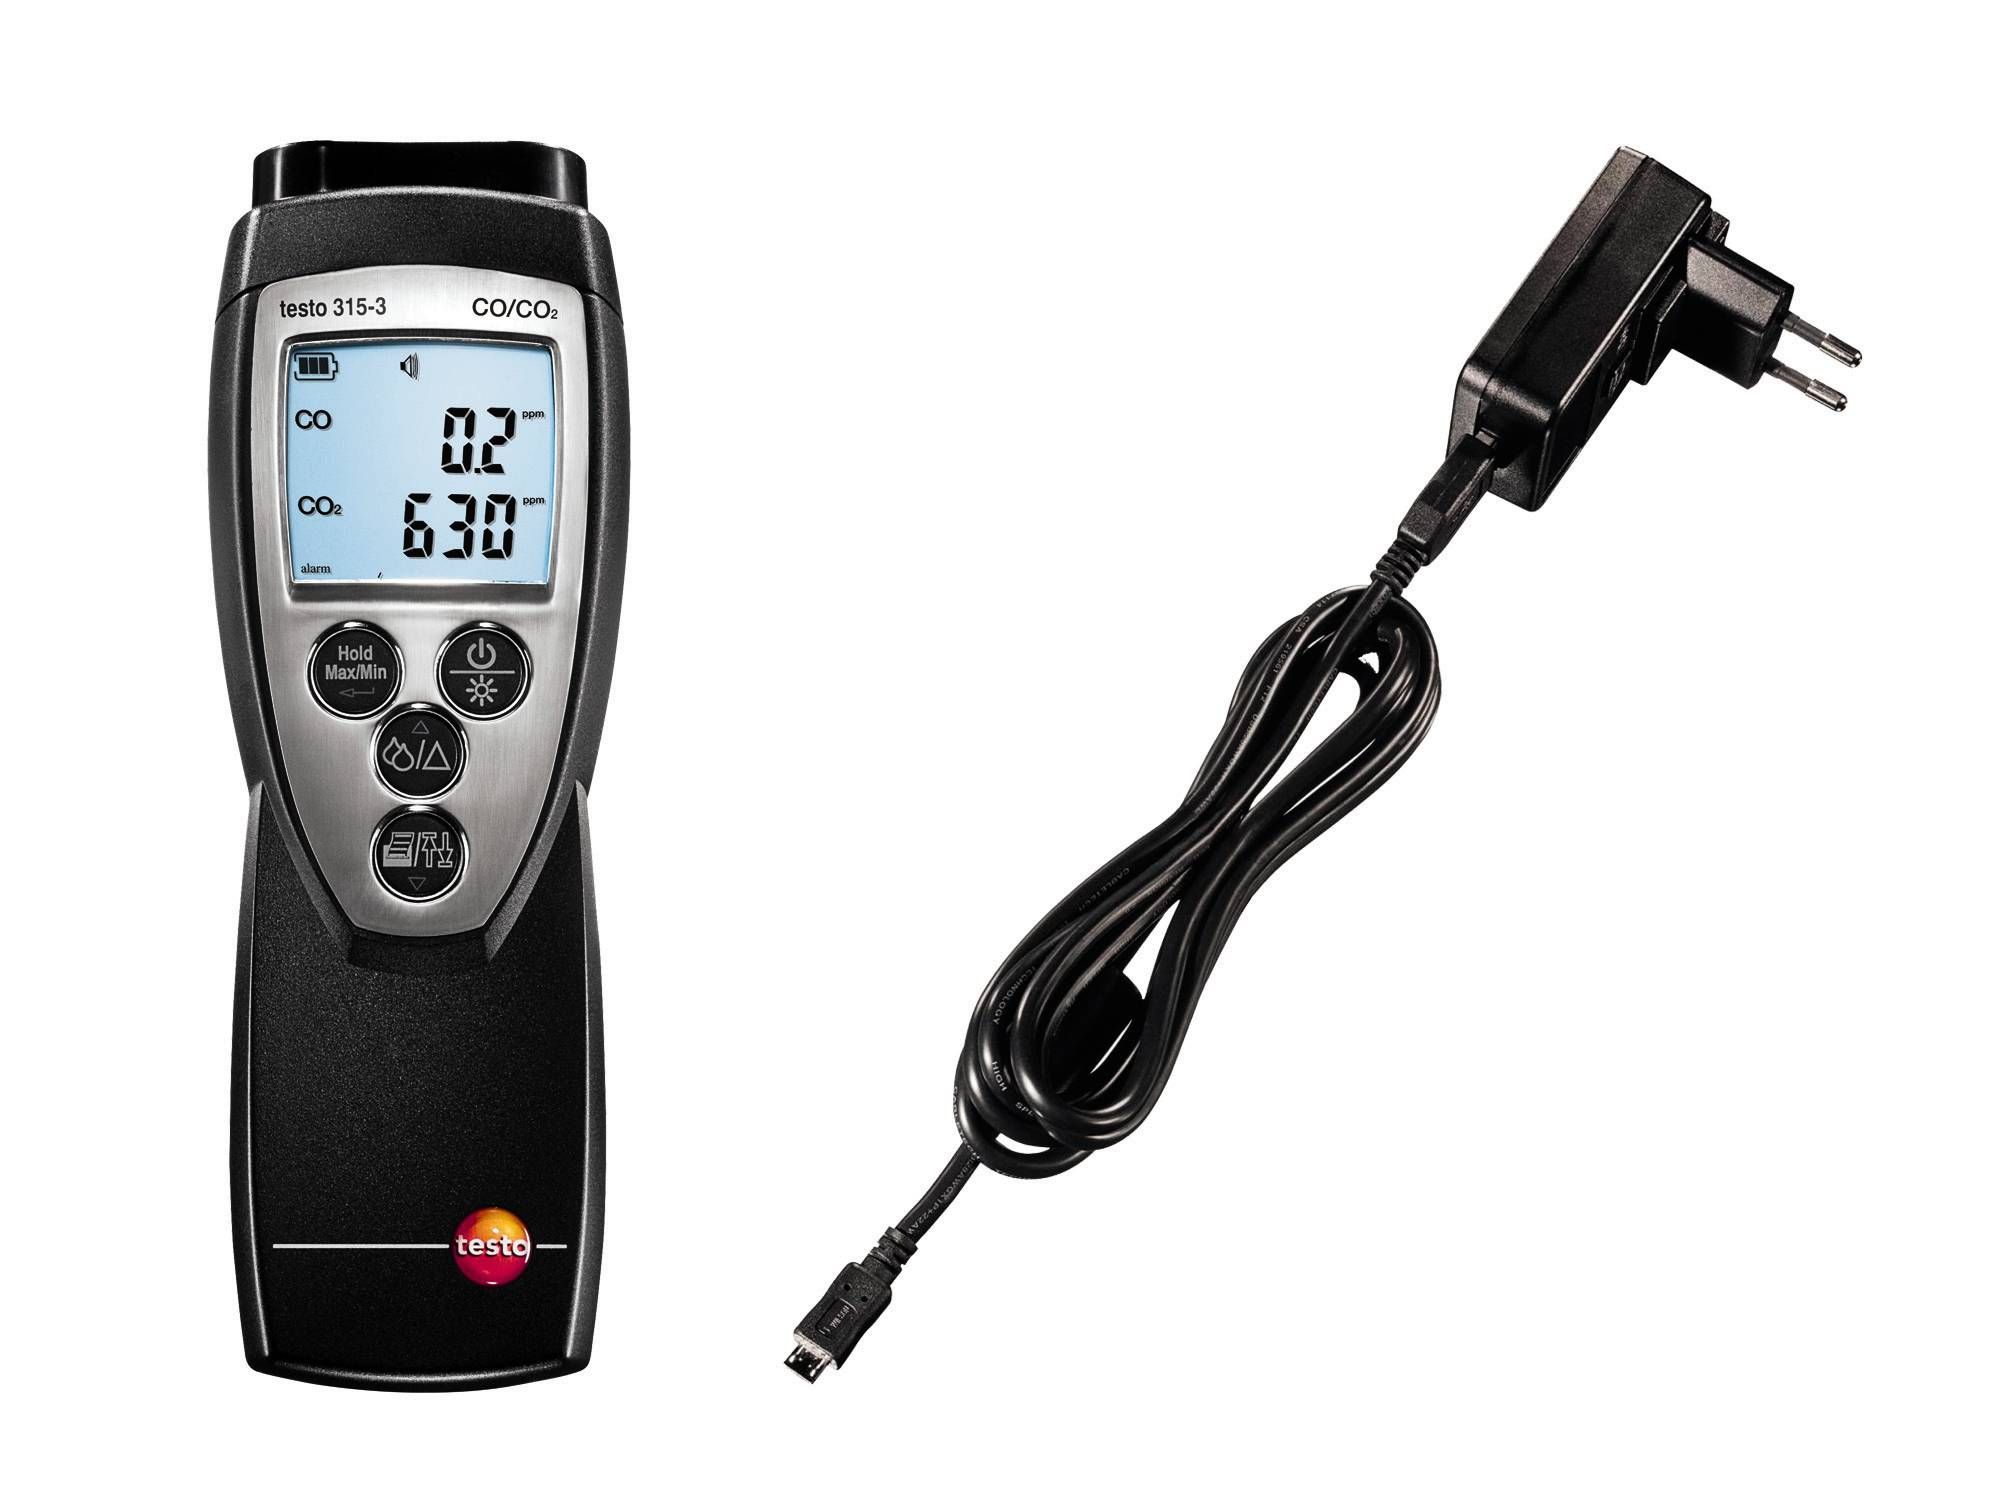 CO and CO2 monitor for ambient measurements Testo 315-3